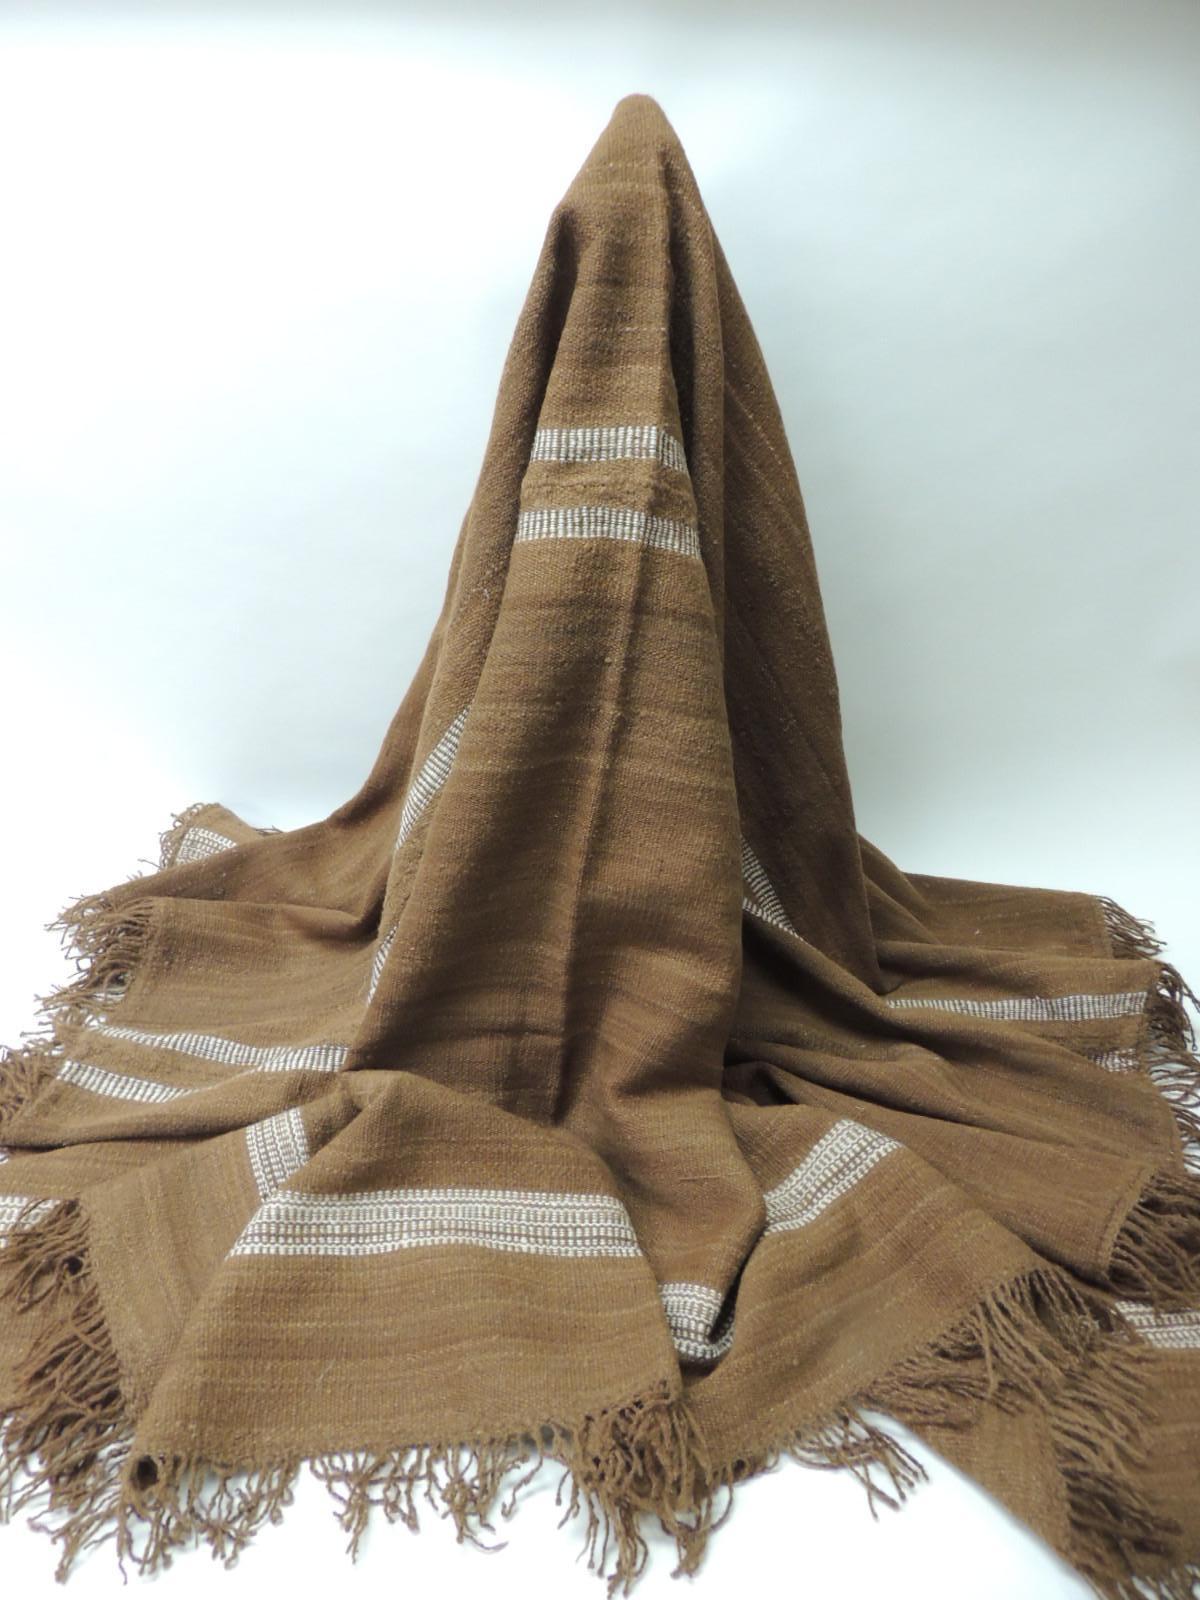 Vintage brown and white woven wool throw with hand-knotted fringes.
Large South American, thick woven cloth. Ideal on a table, sofa or chair. Also, on the food of a bed.
Size: 57.5 x 71.5.